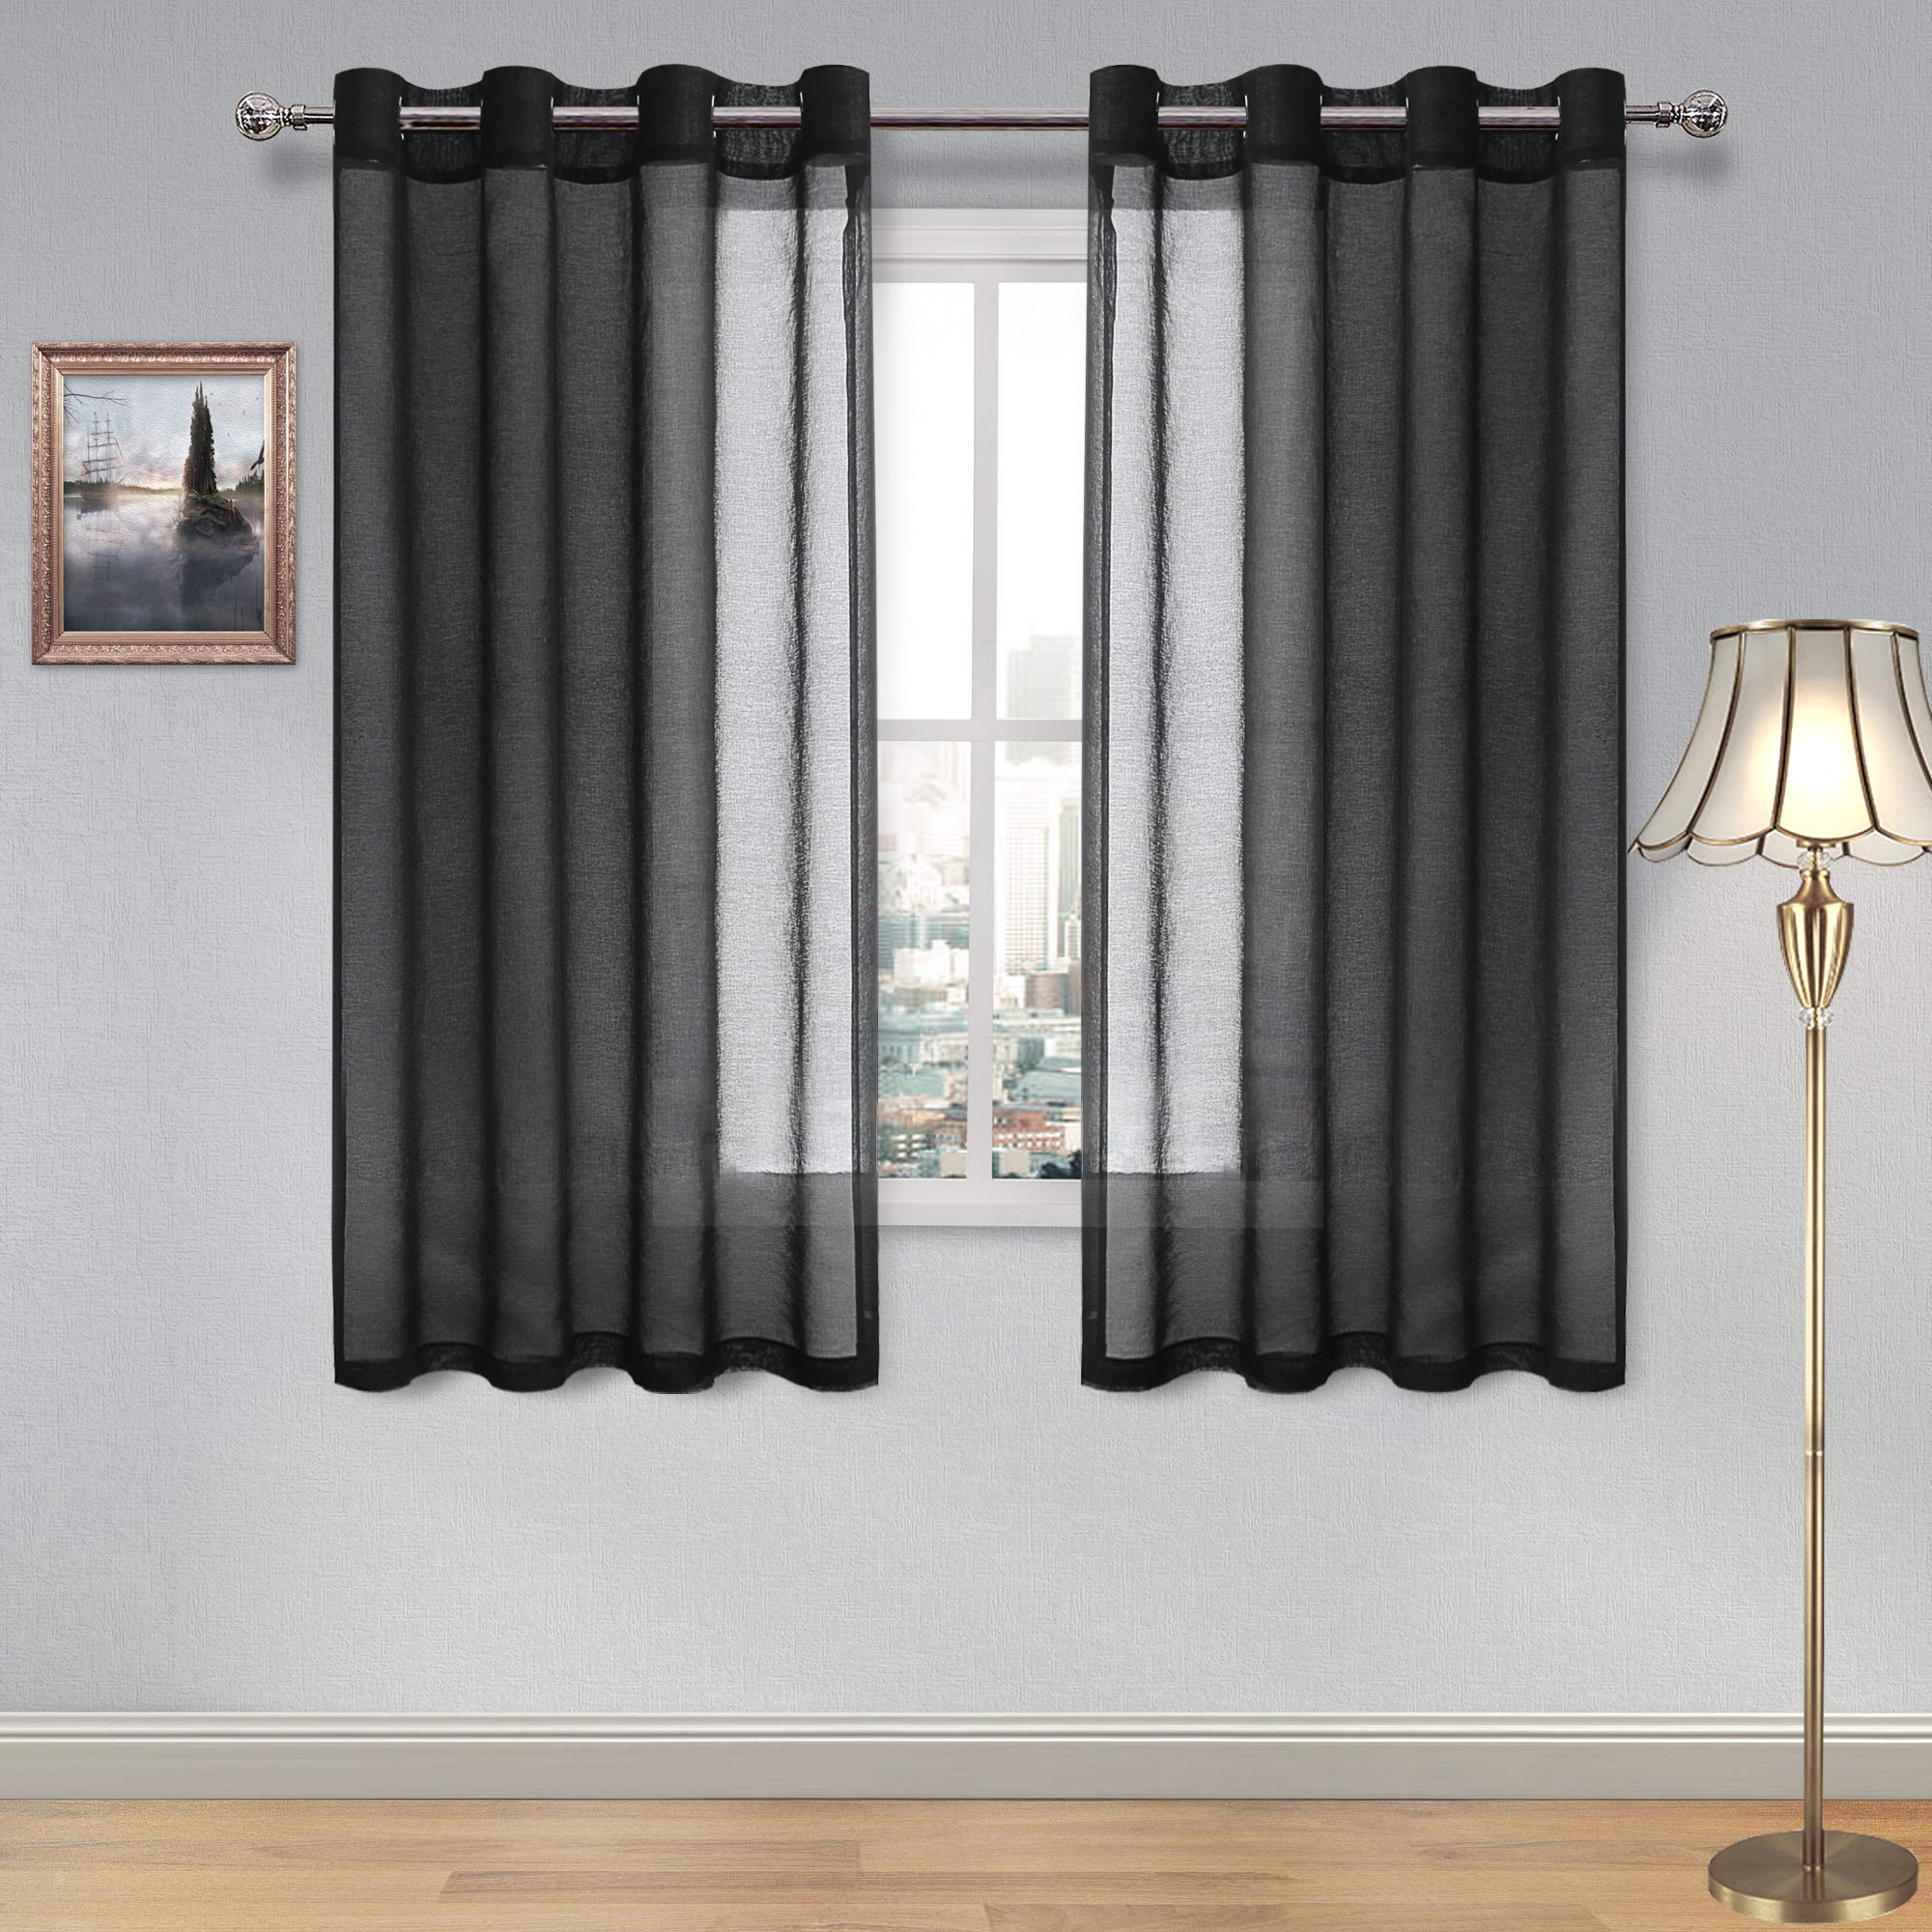 DWcN Sheer curtains Faux Linen grommet Window curtain Voile Sheer Drapes for Living Room Set of 2 Panels 52 x 45 Inch Long,Black